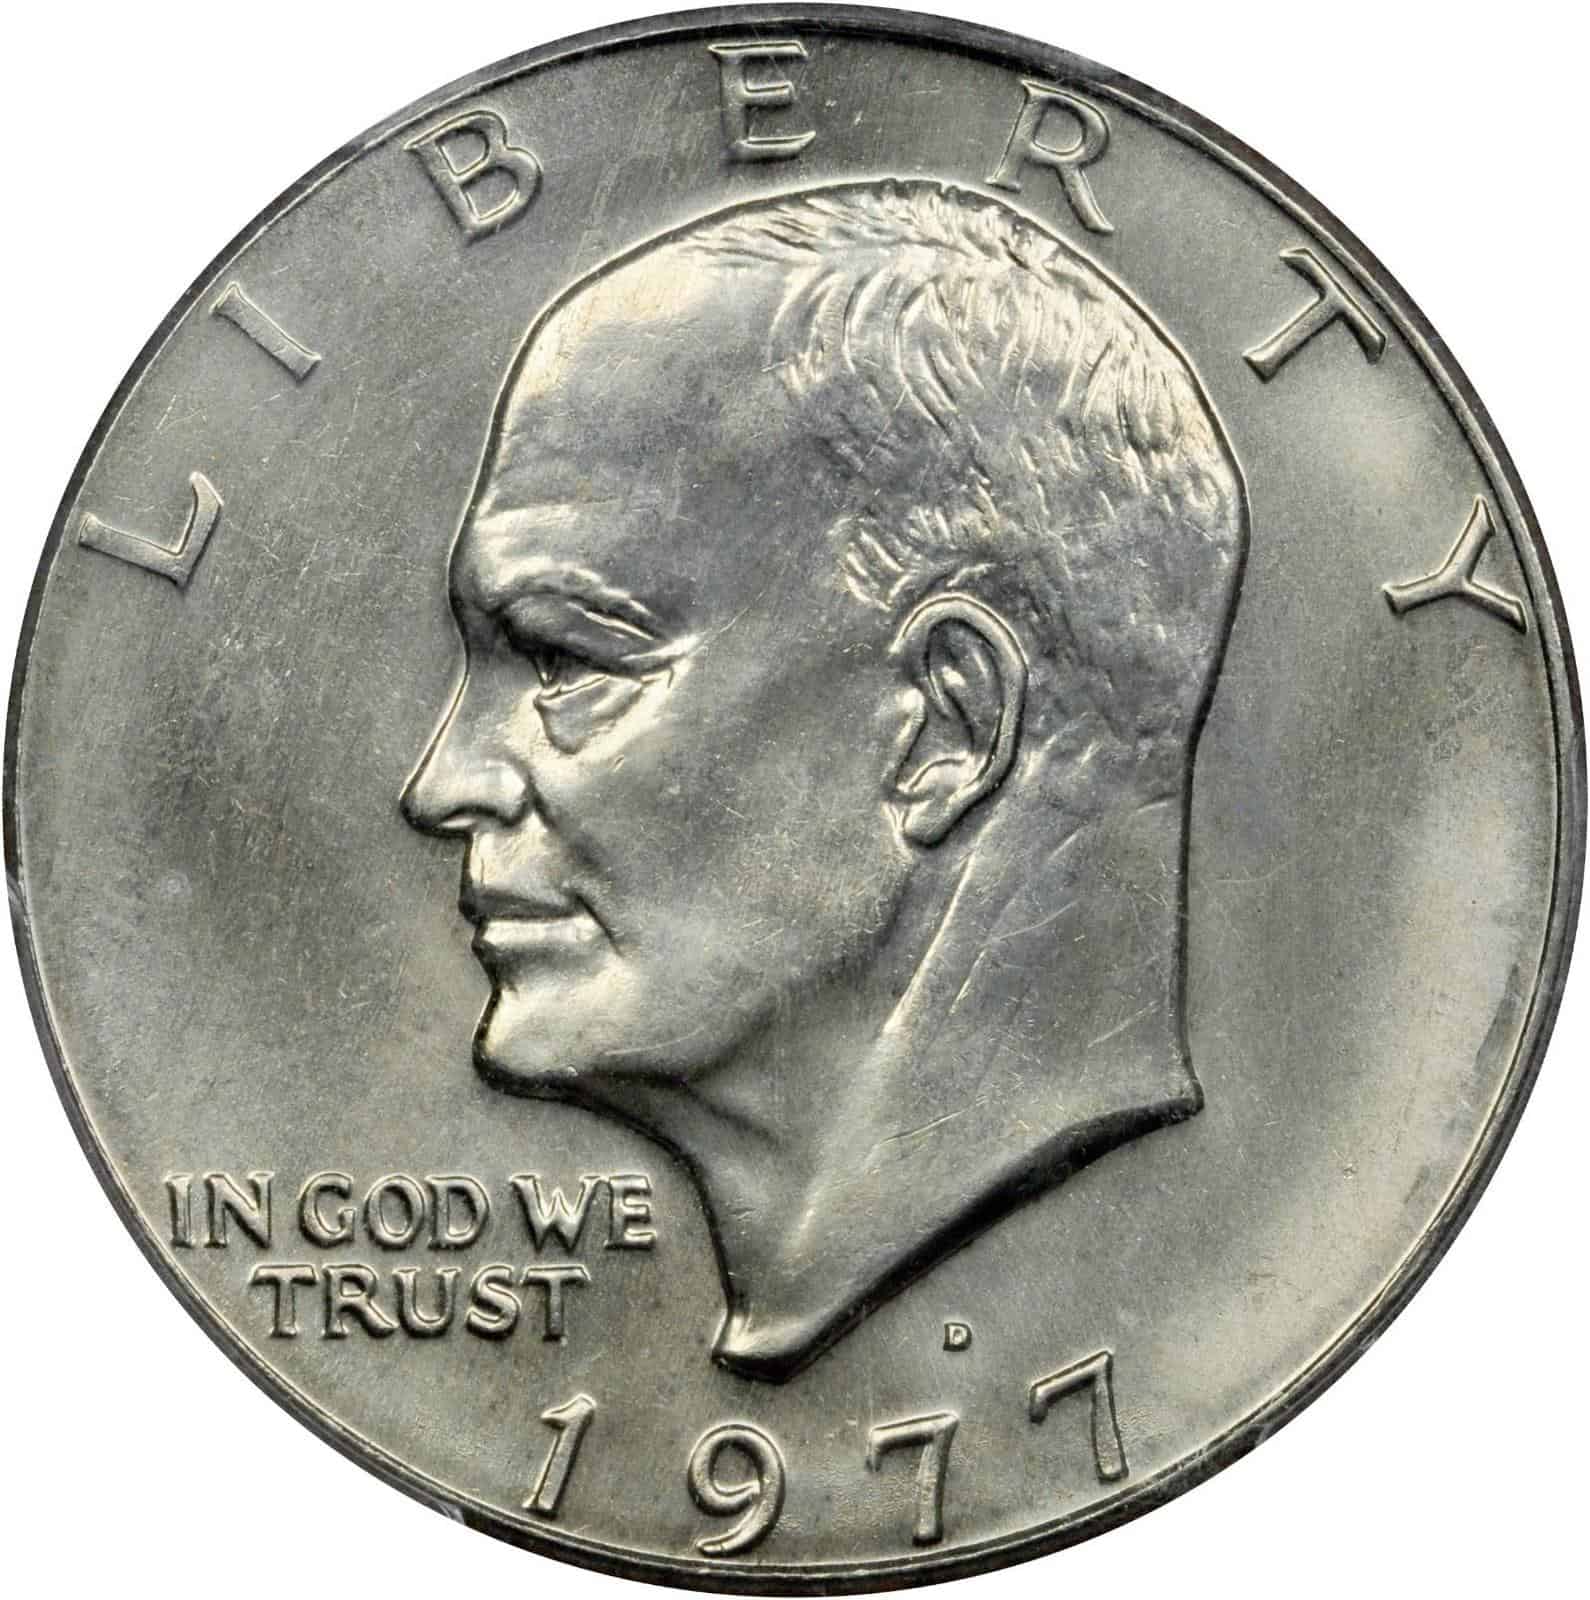 The Obverse of the 1977 Silver Dollar